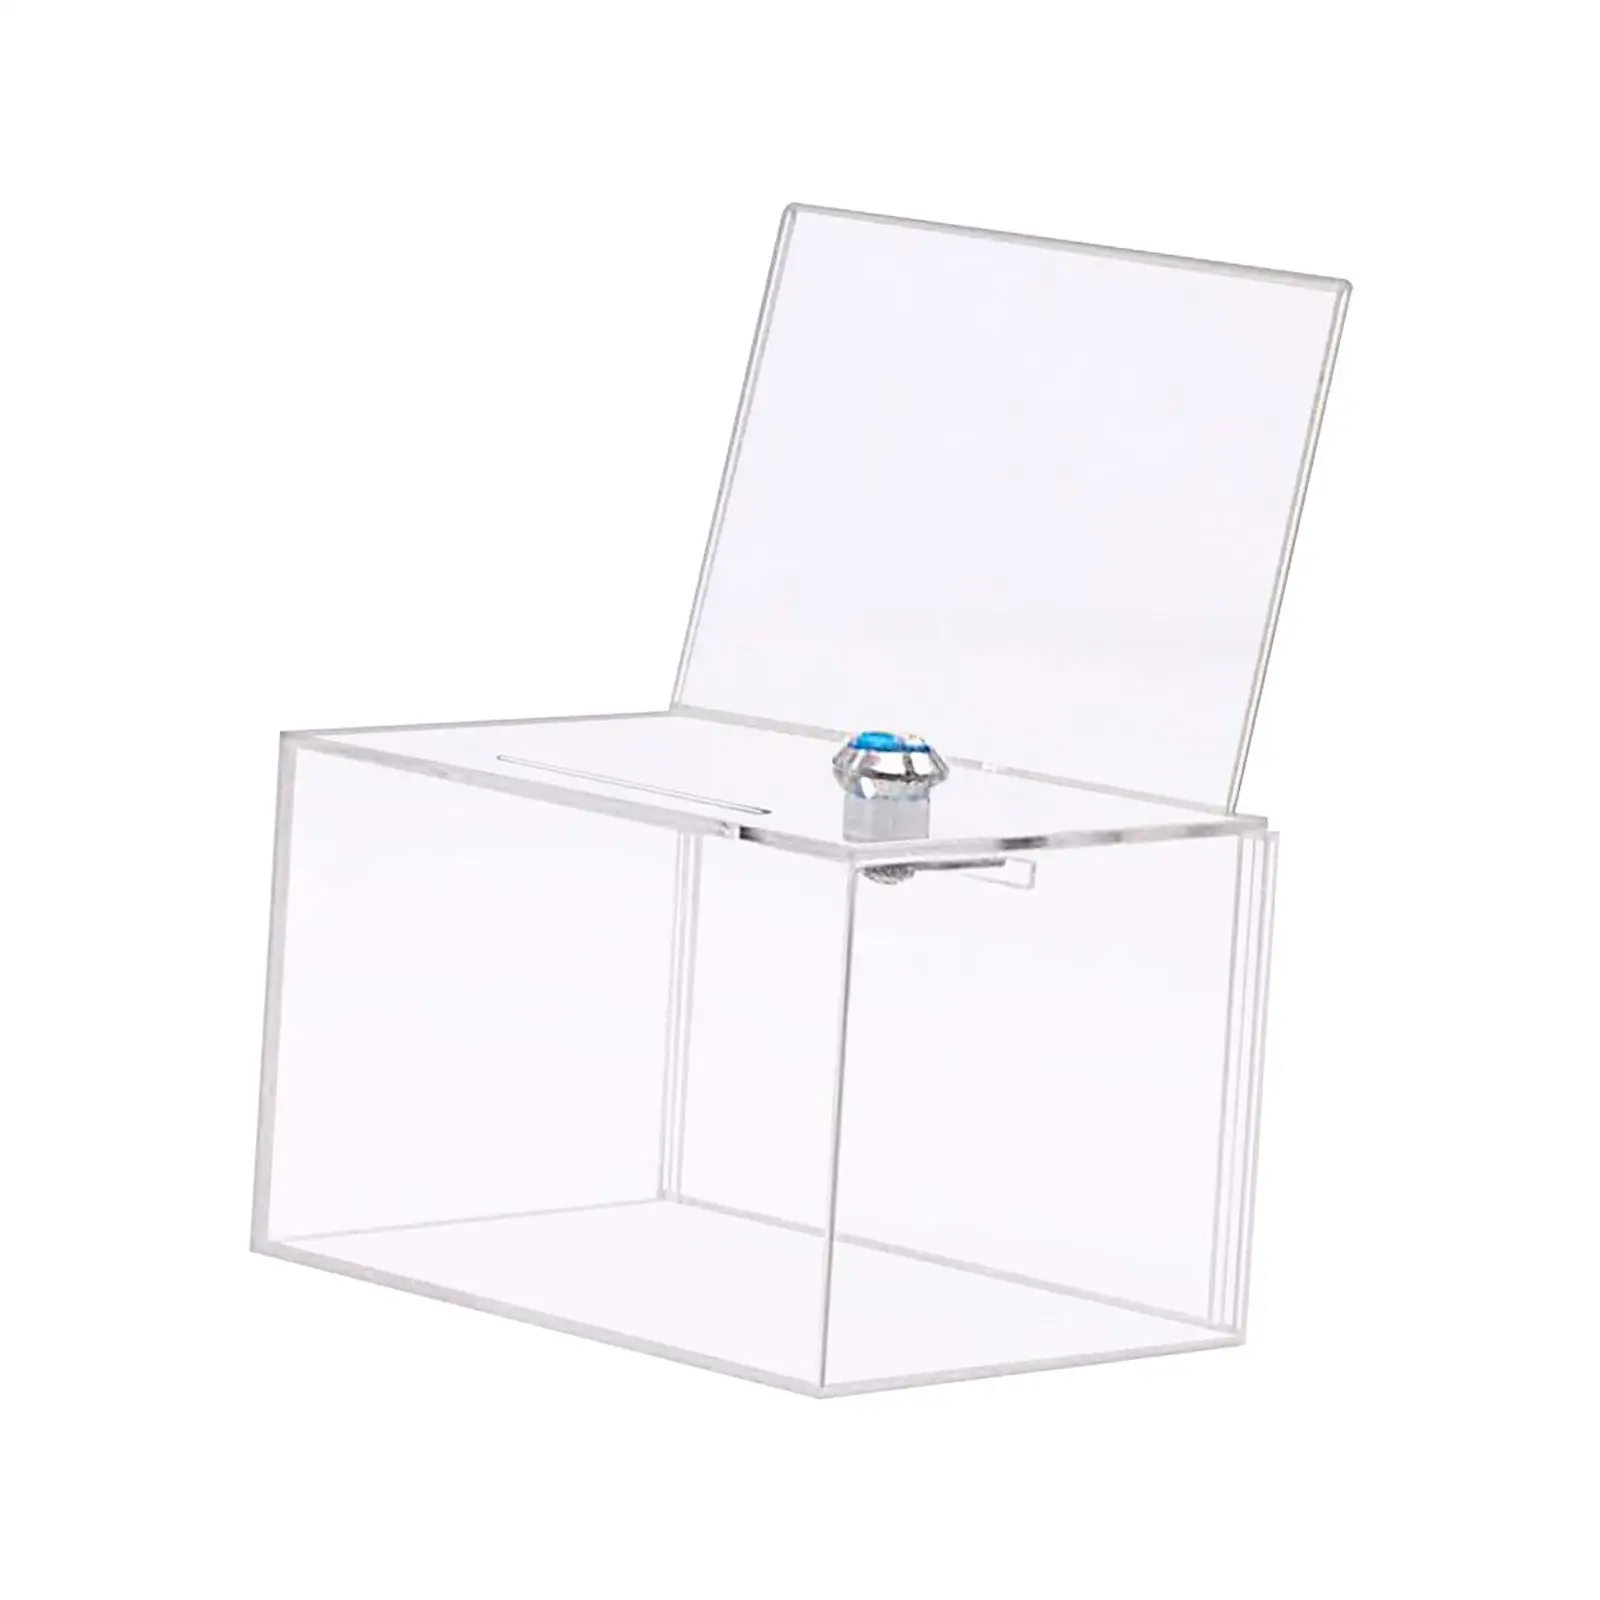 Acrylic Donation Case Collection Box with Lock Box Display Case for Tabletop